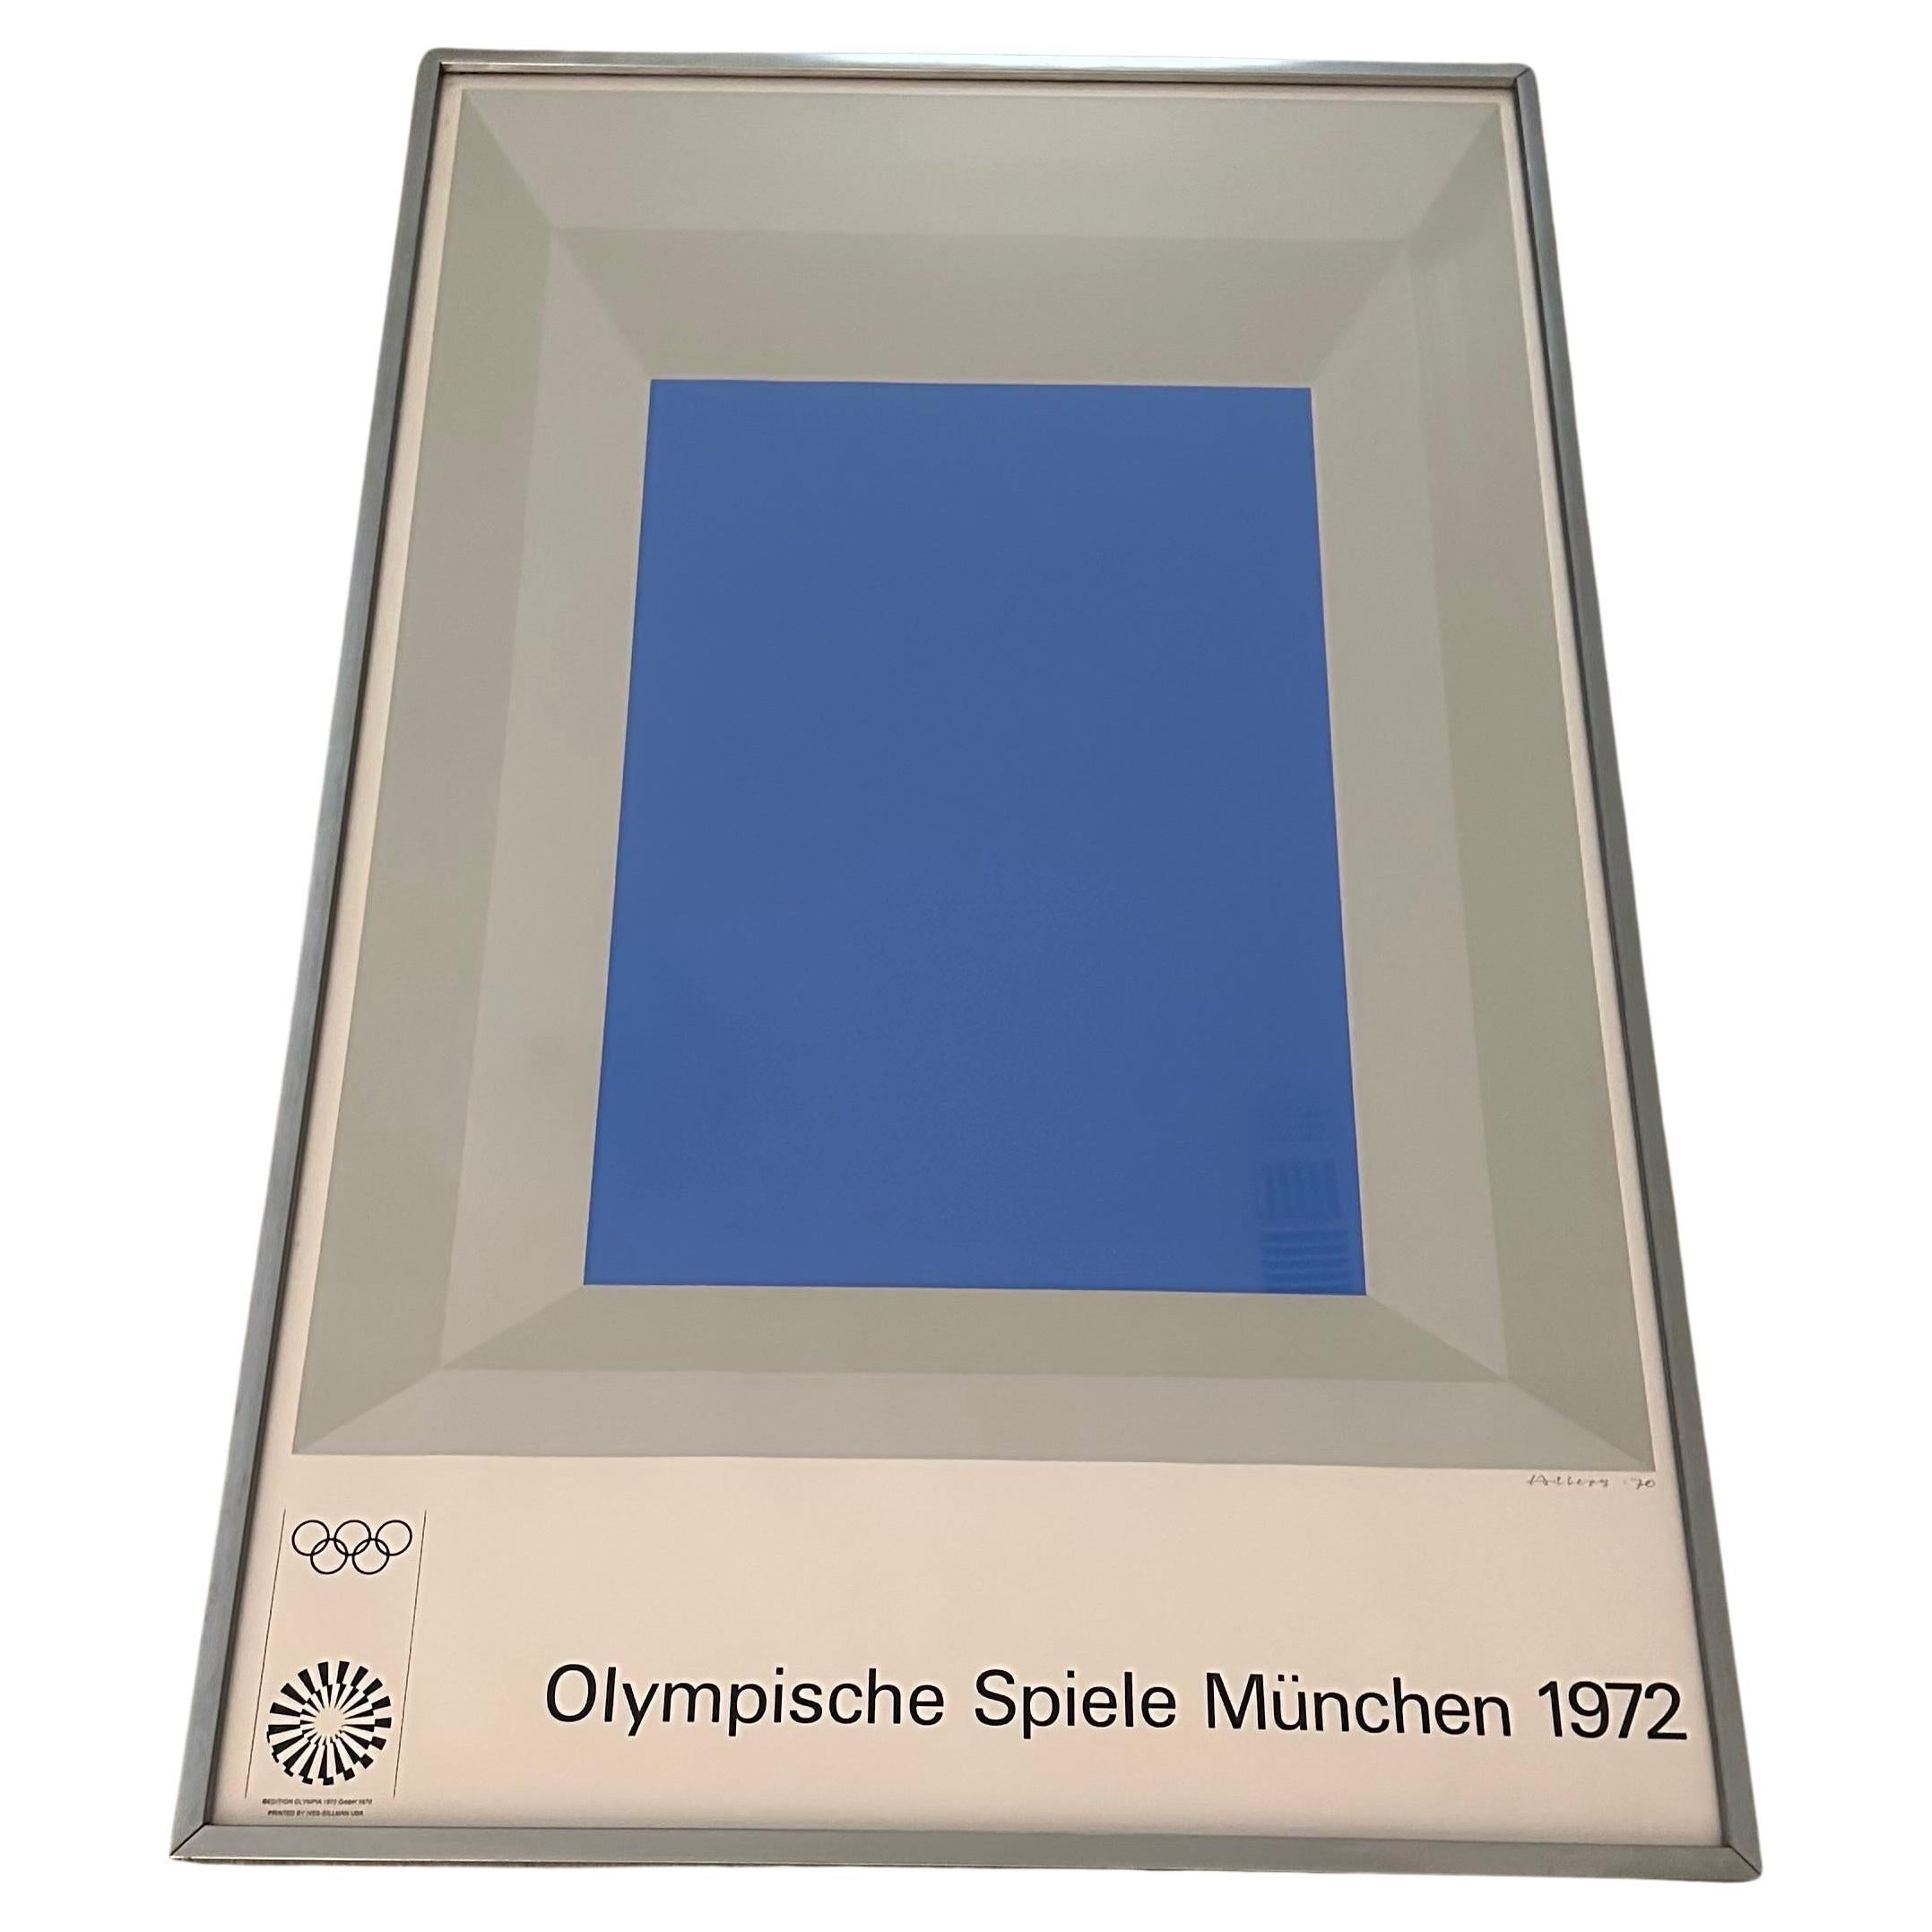 Abstract Serigraph Poster Entitled "1972 Munich Olympics" by Josef Albers